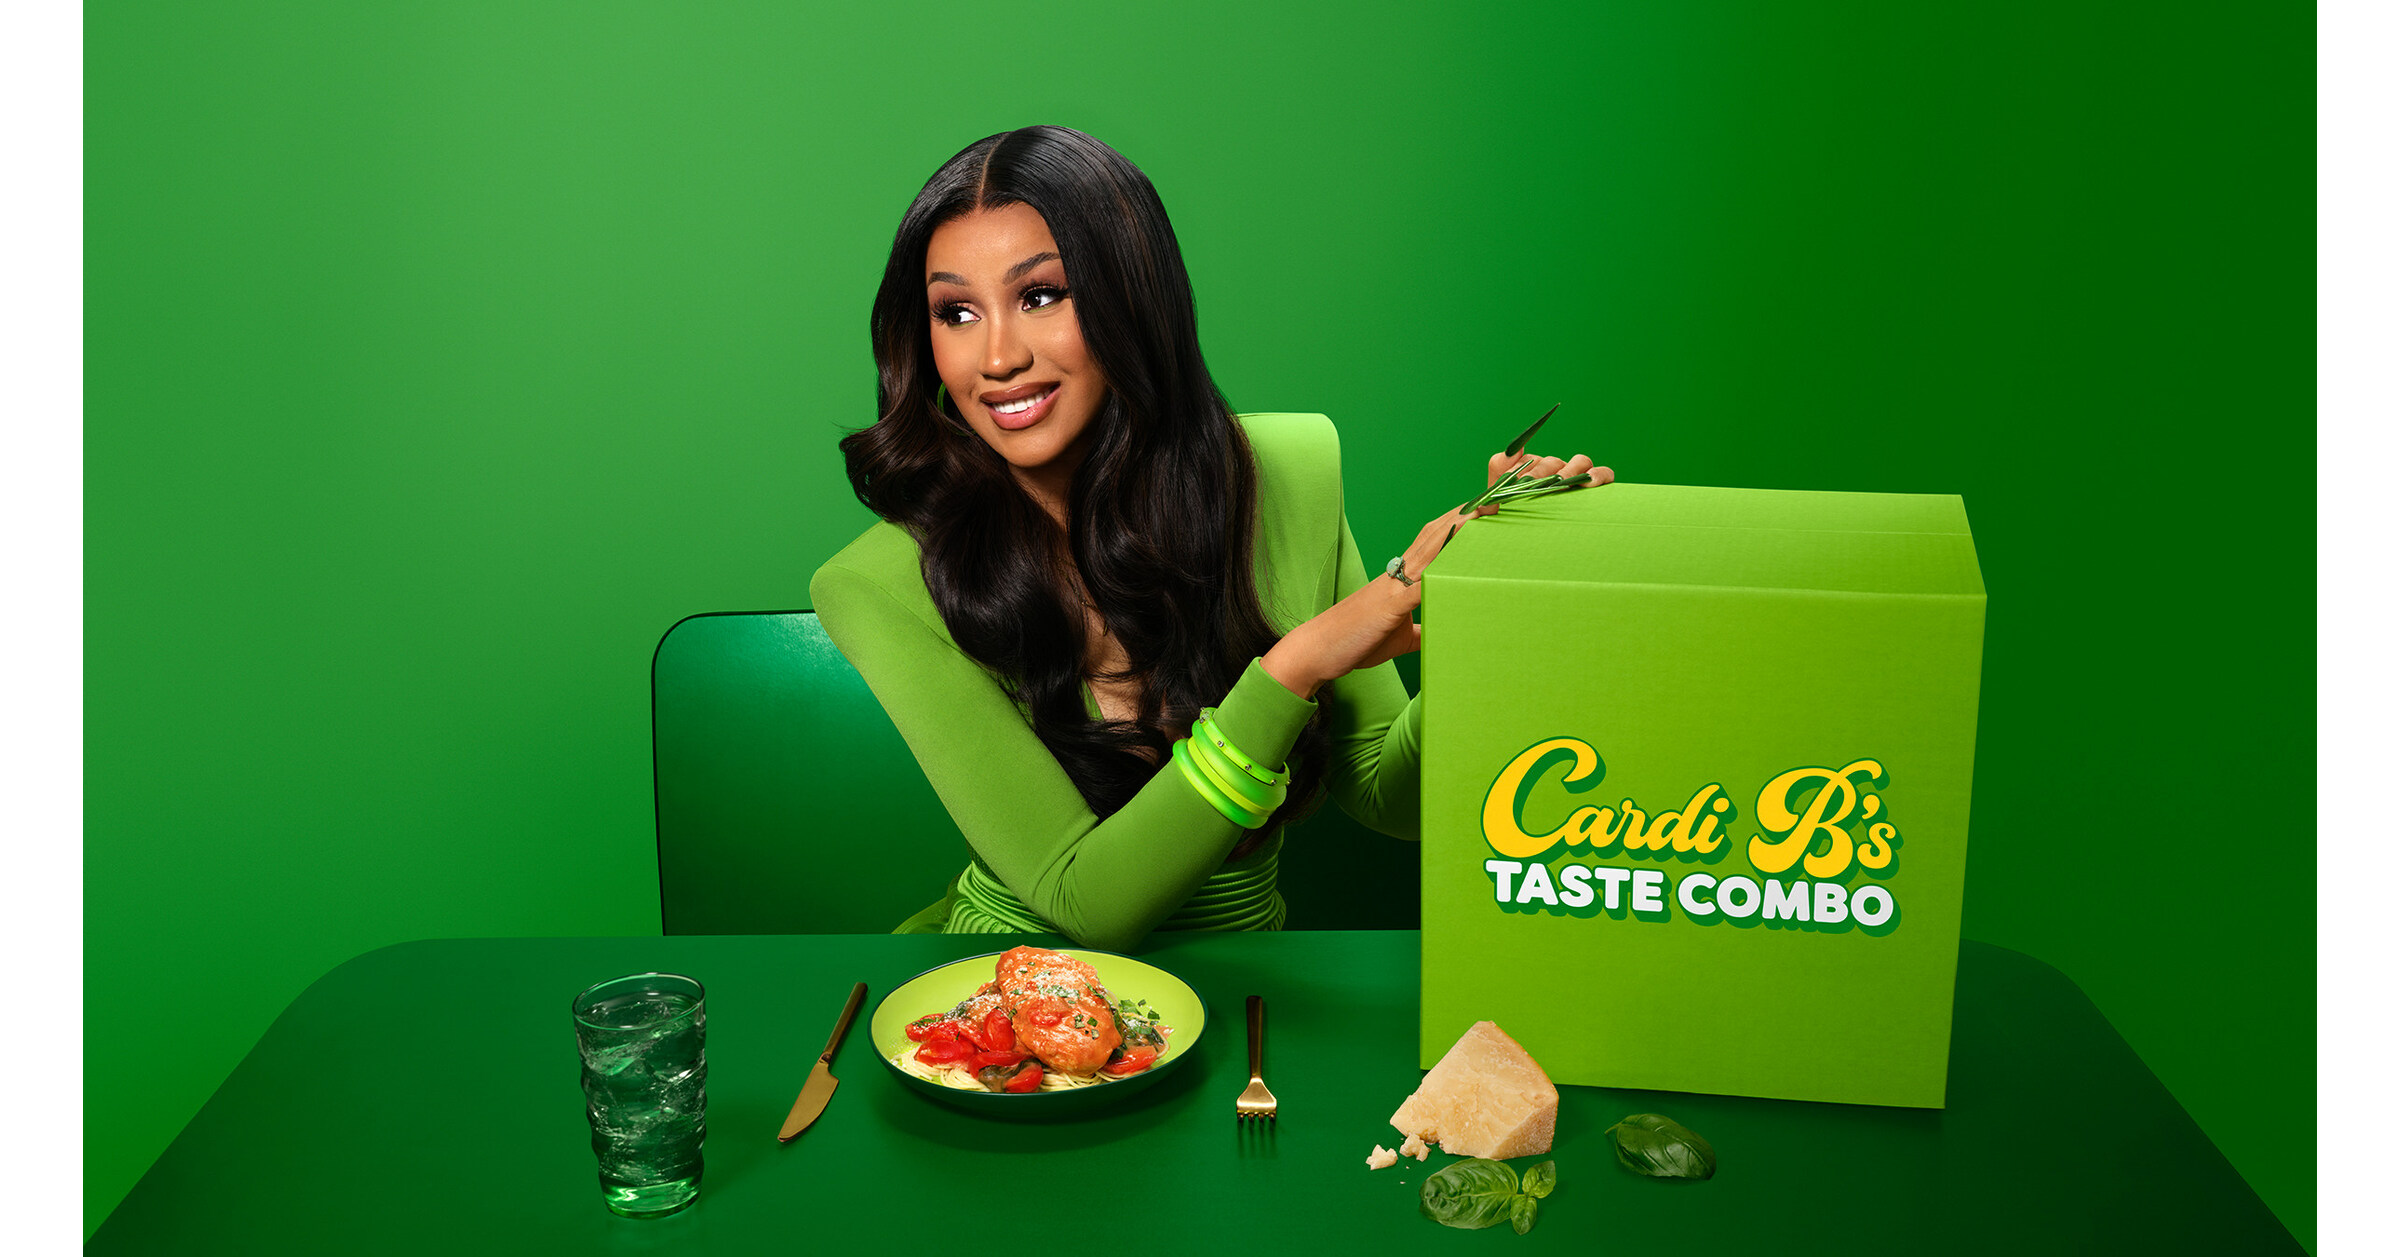 https://mma.prnewswire.com/media/2093700/2023_Knorr_TasteCombos_CardiB_At_Table_with_Meal_Kit.jpg?p=facebook